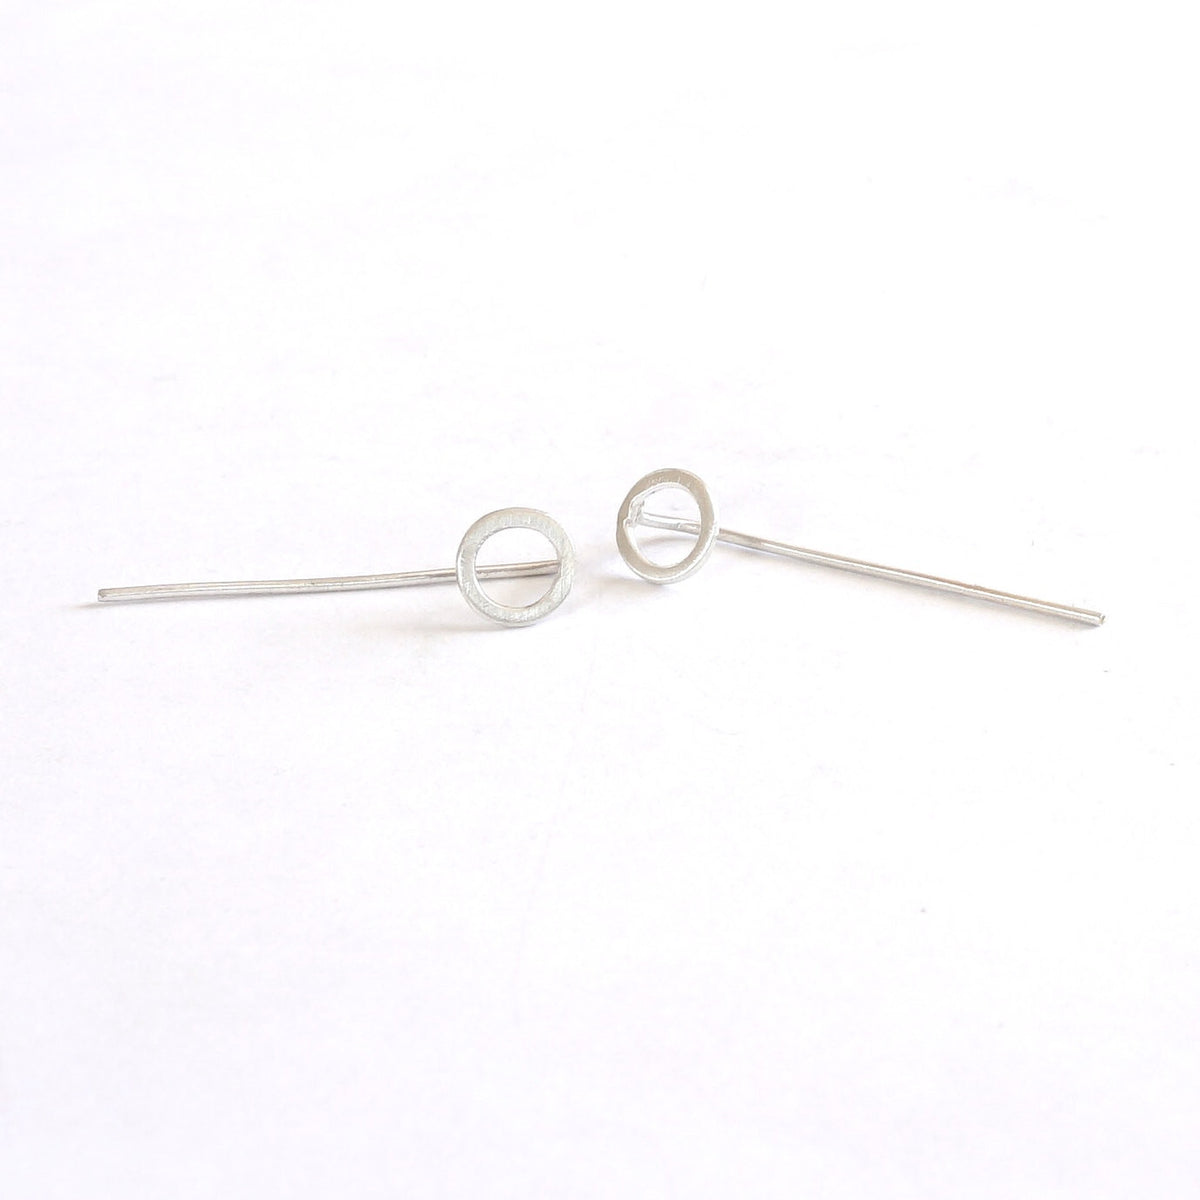 Sophisticated and Tasteful, Hand-Crafted Open Circle Threader Earring - 0214 - Virginia Wynne Designs